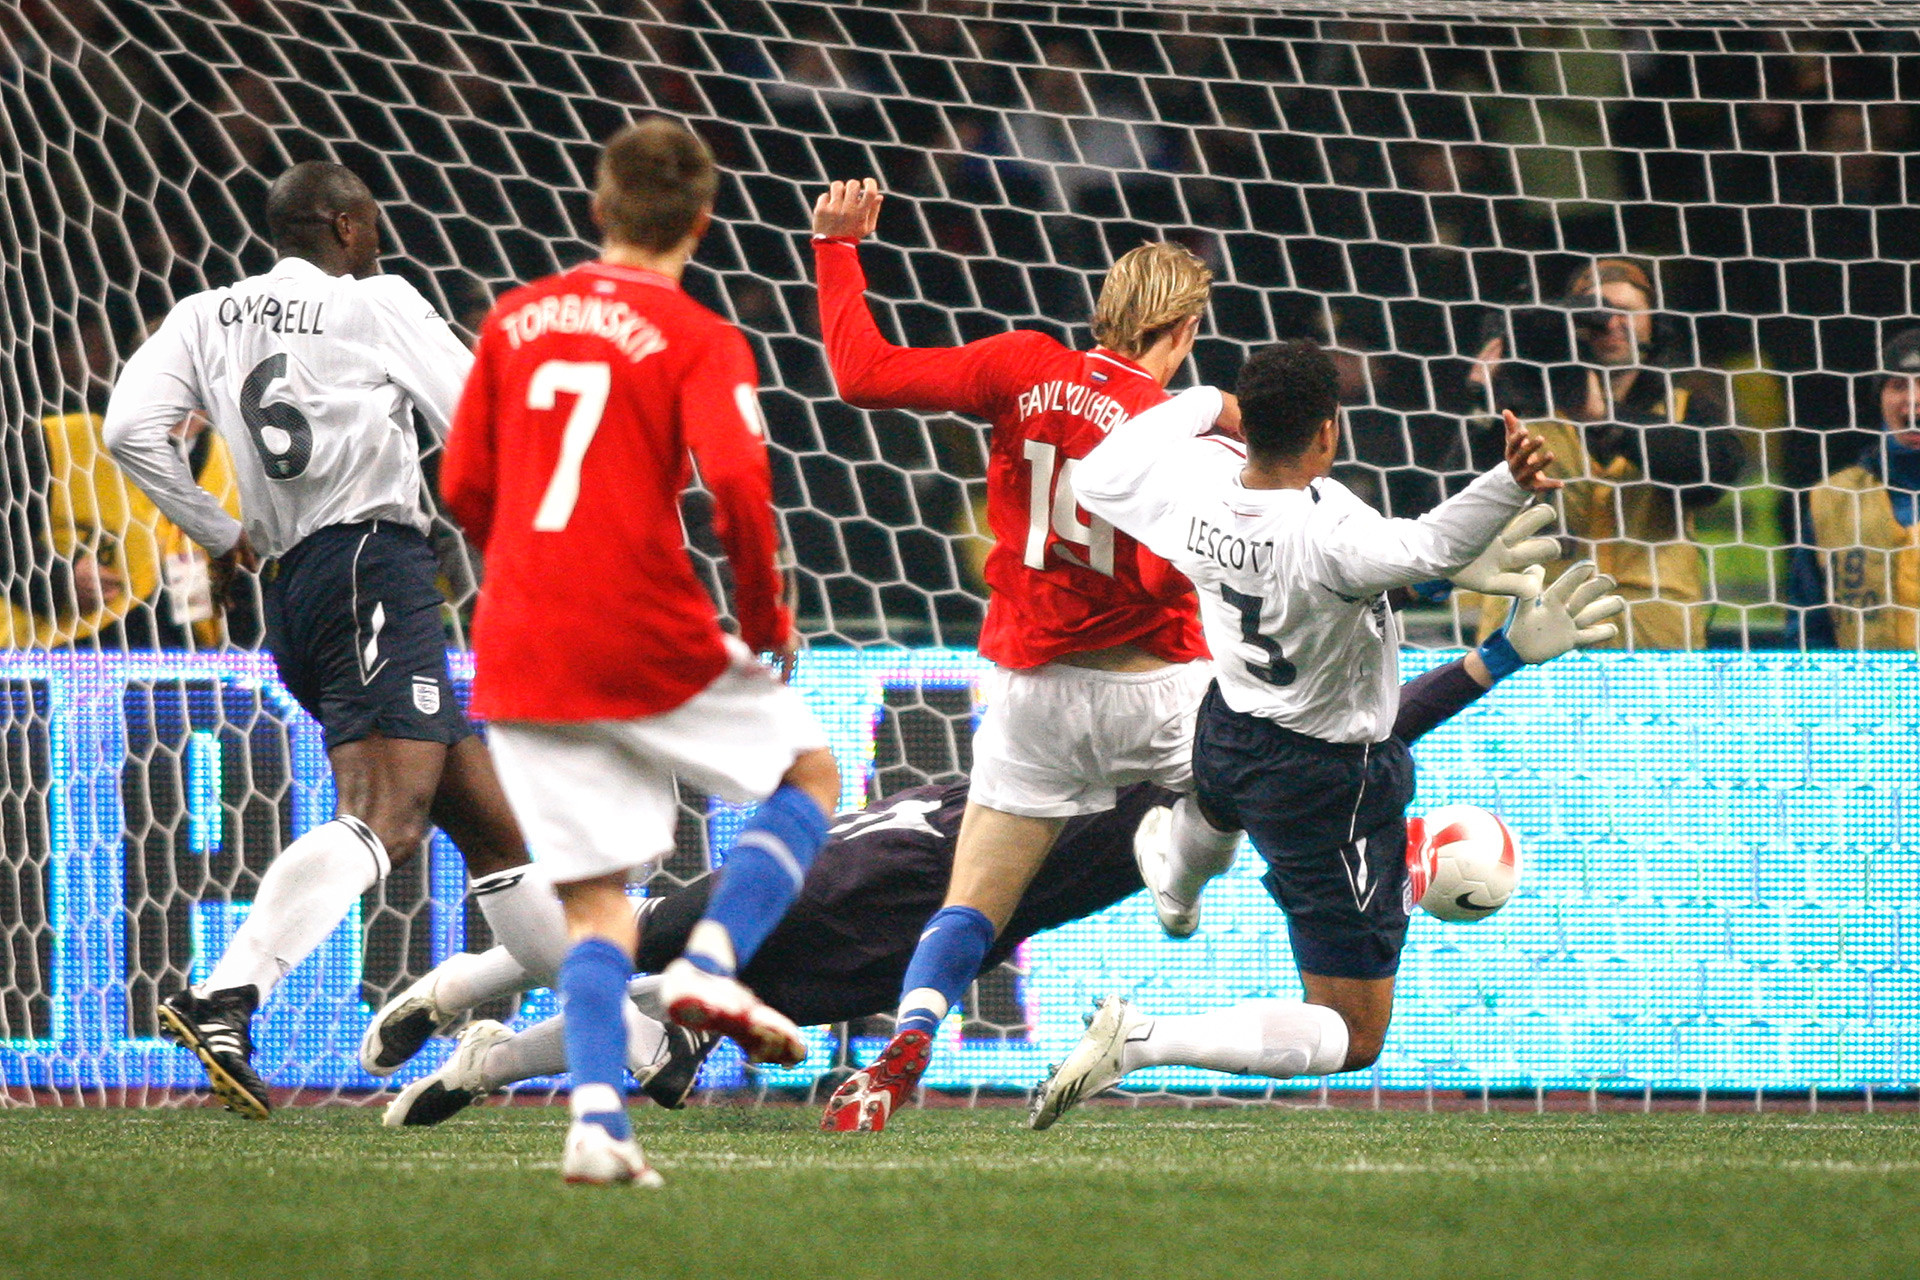 Roman Pavlyuchenko scoring in the match against England (2:1). This victory led Russia to the Euro, leaving the English team behind.